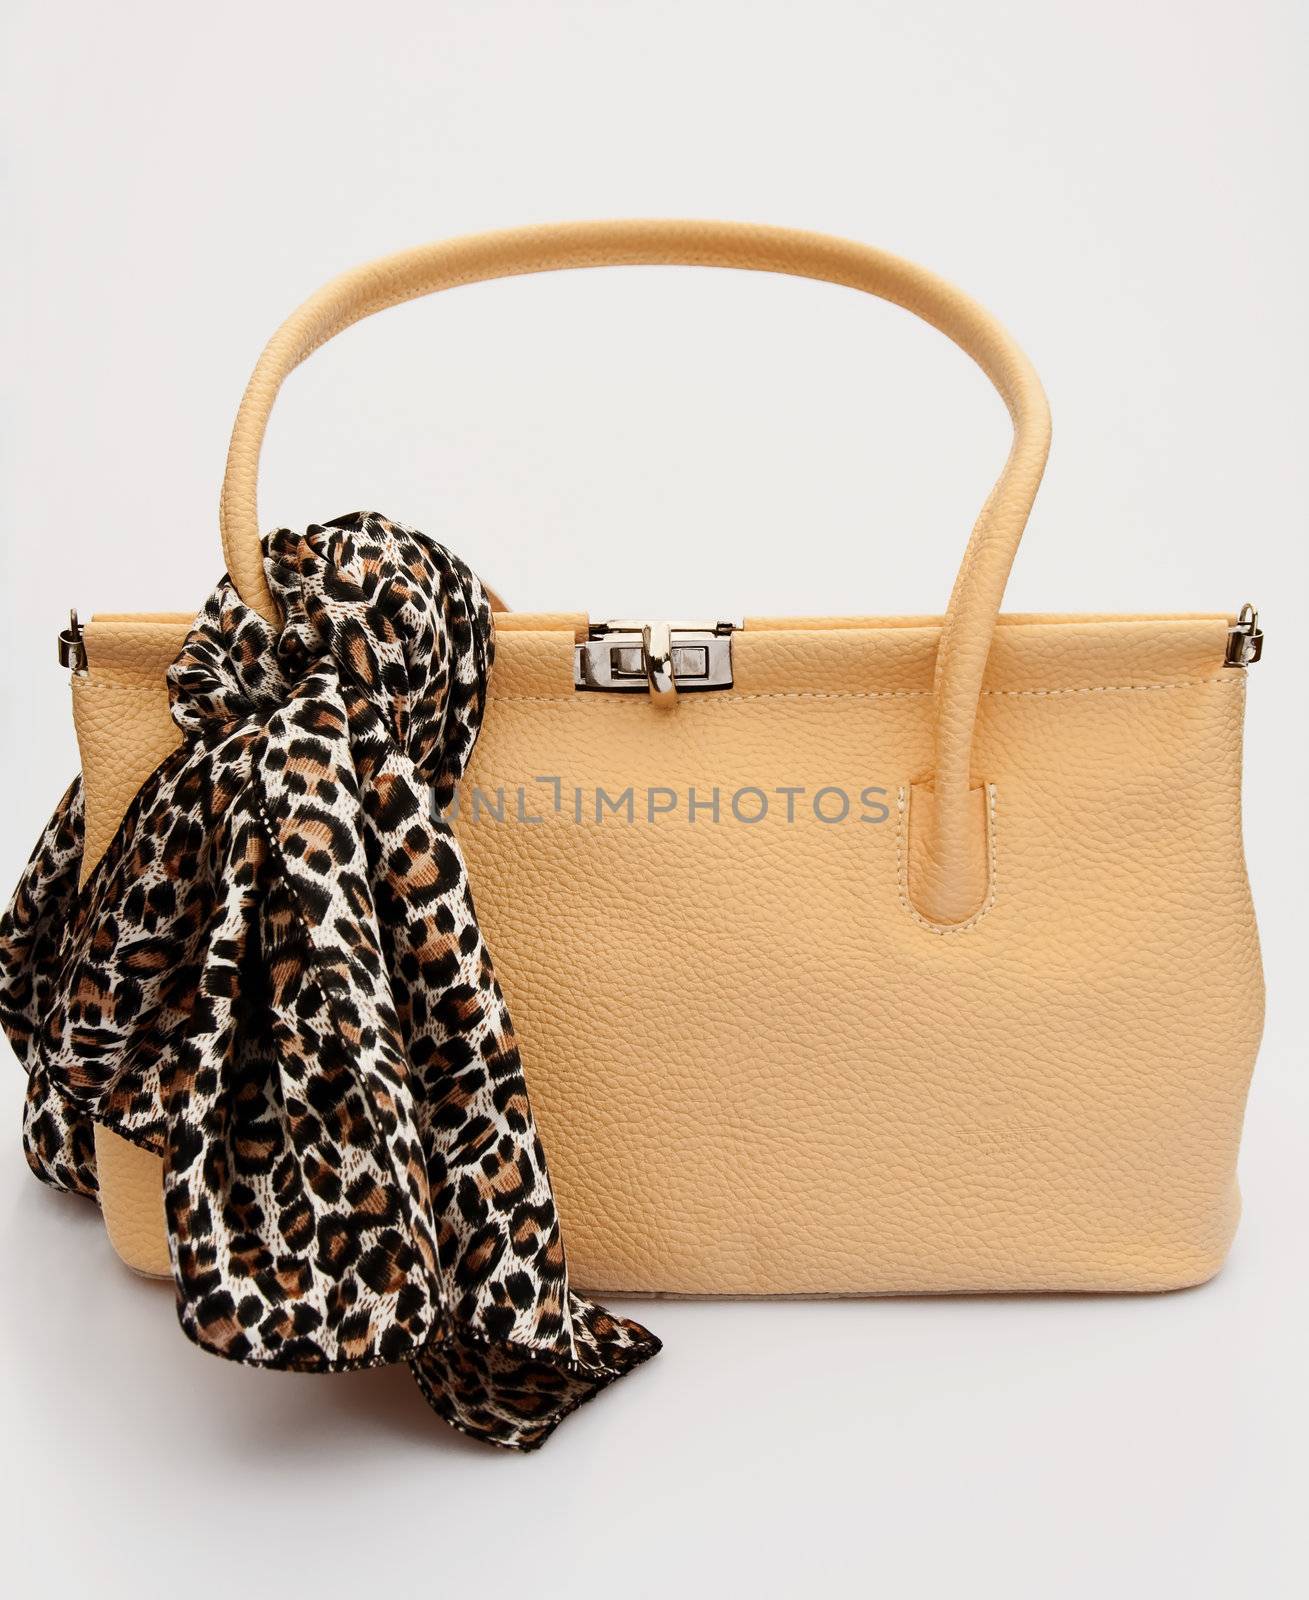 A cream colored female handbag in fifties style with a leopard patterned scarf